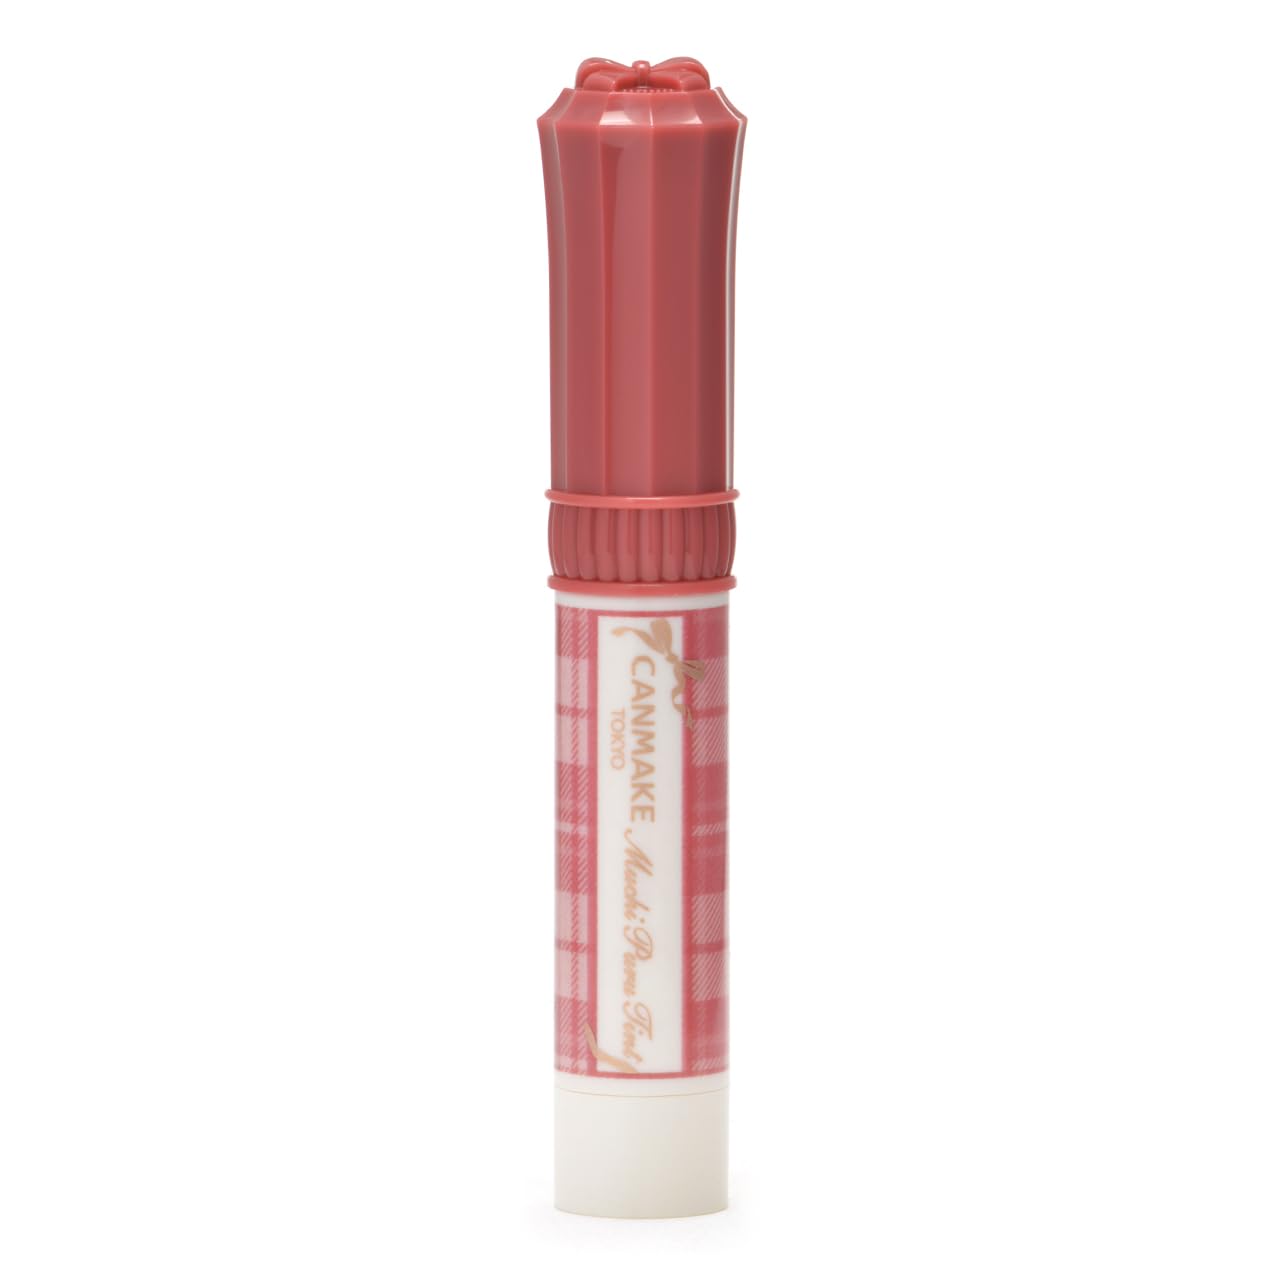 Canmake Muchipuru Lip Tint in Fig Puree - 2.7g Glossy Cool Rose Pink Volume Tint